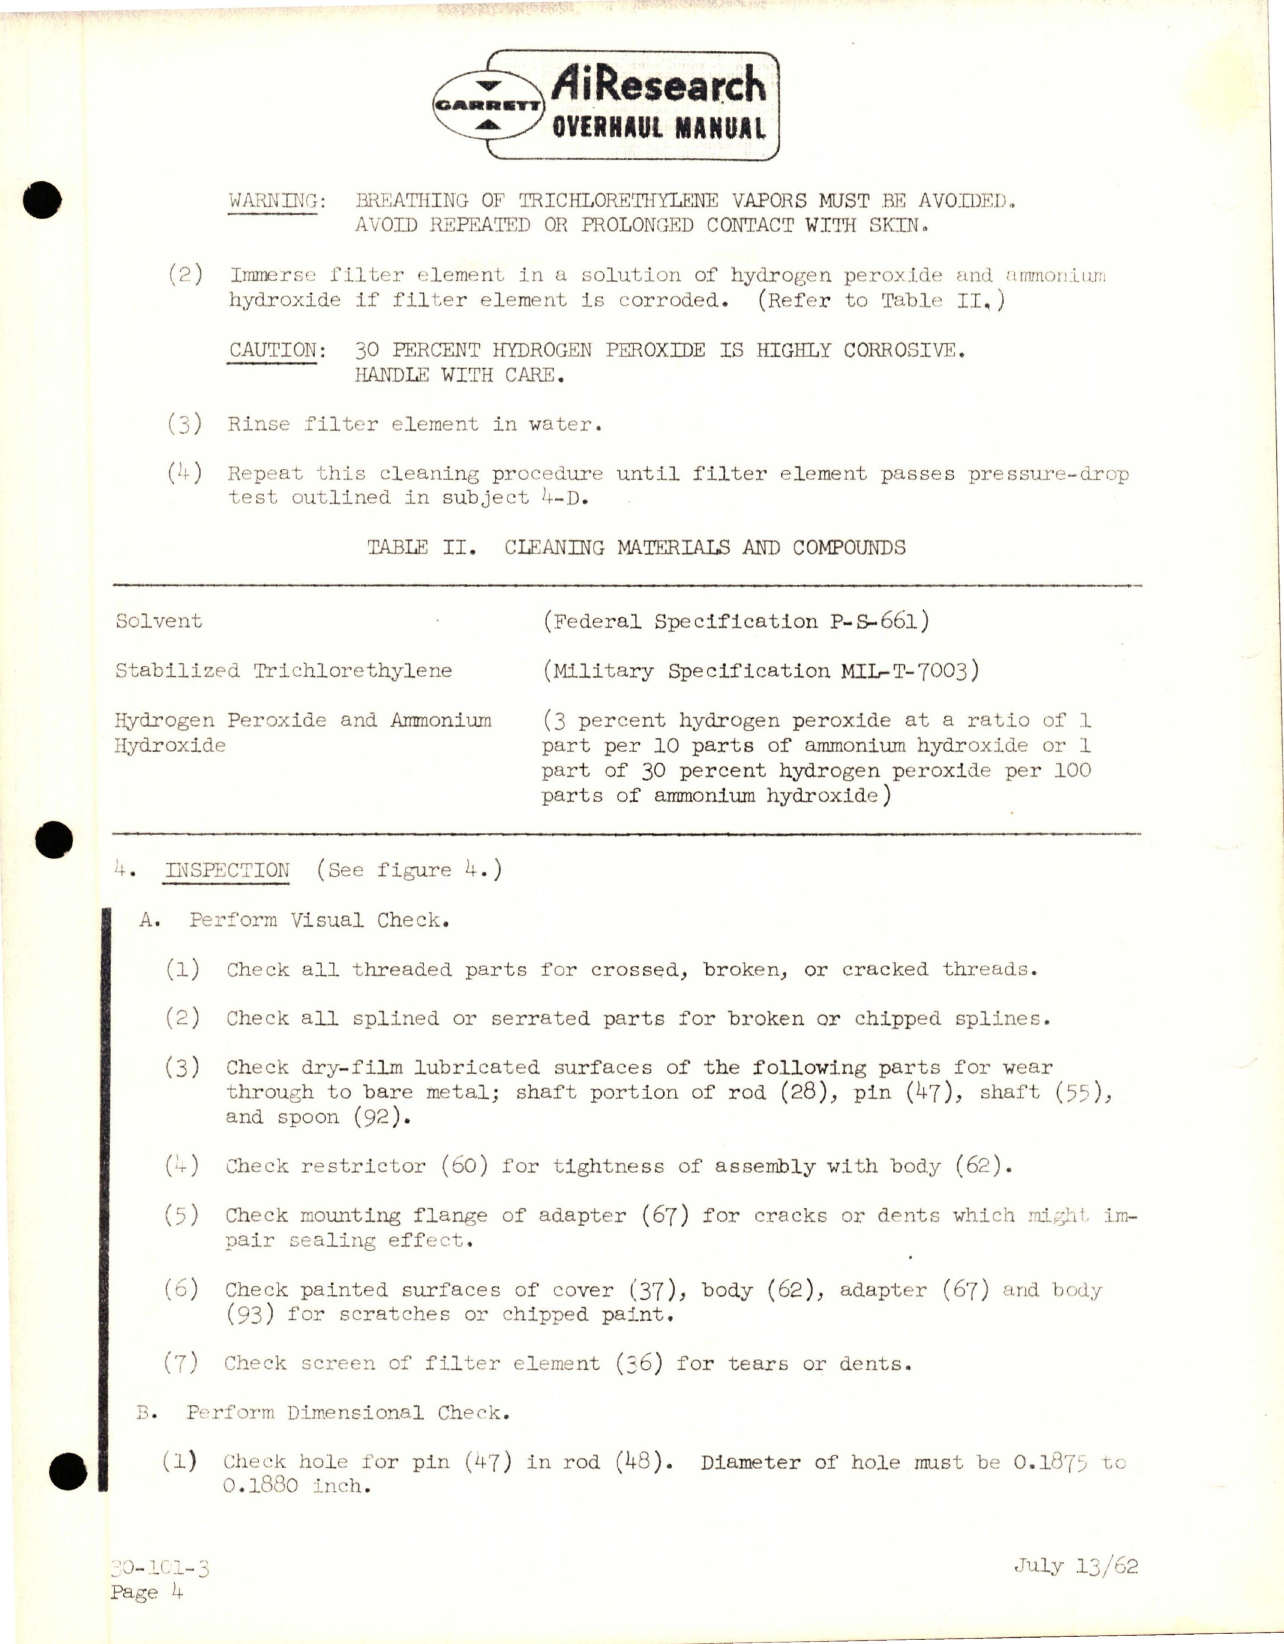 Sample page 7 from AirCorps Library document: Overhaul Manual for Two-Inch Diameter Pneumatic Shutoff Valve - Part 106462 